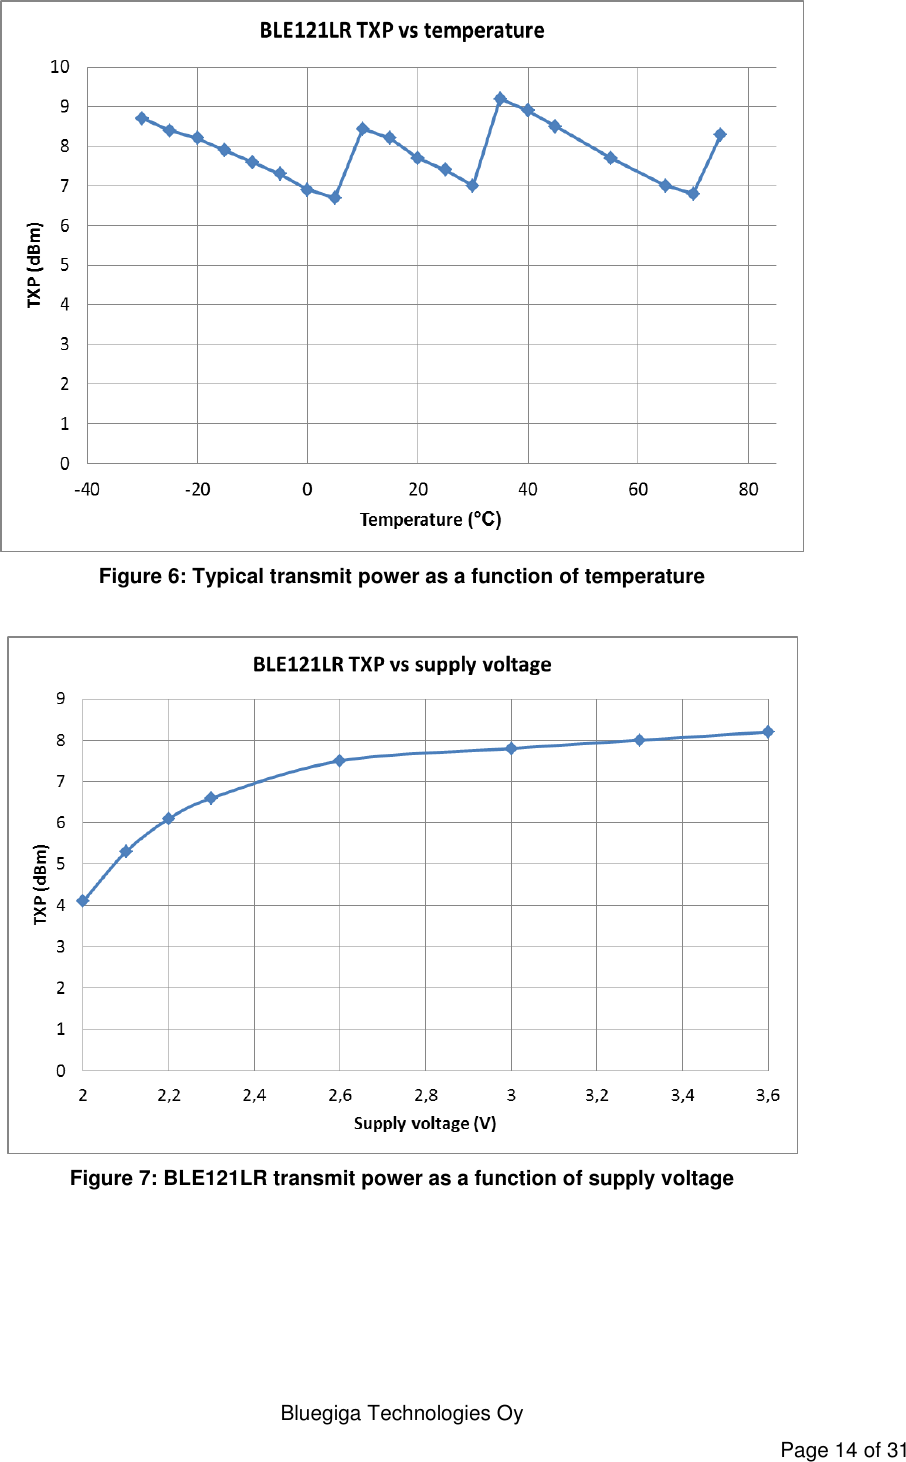   Bluegiga Technologies Oy Page 14 of 31  Figure 6: Typical transmit power as a function of temperature   Figure 7: BLE121LR transmit power as a function of supply voltage  